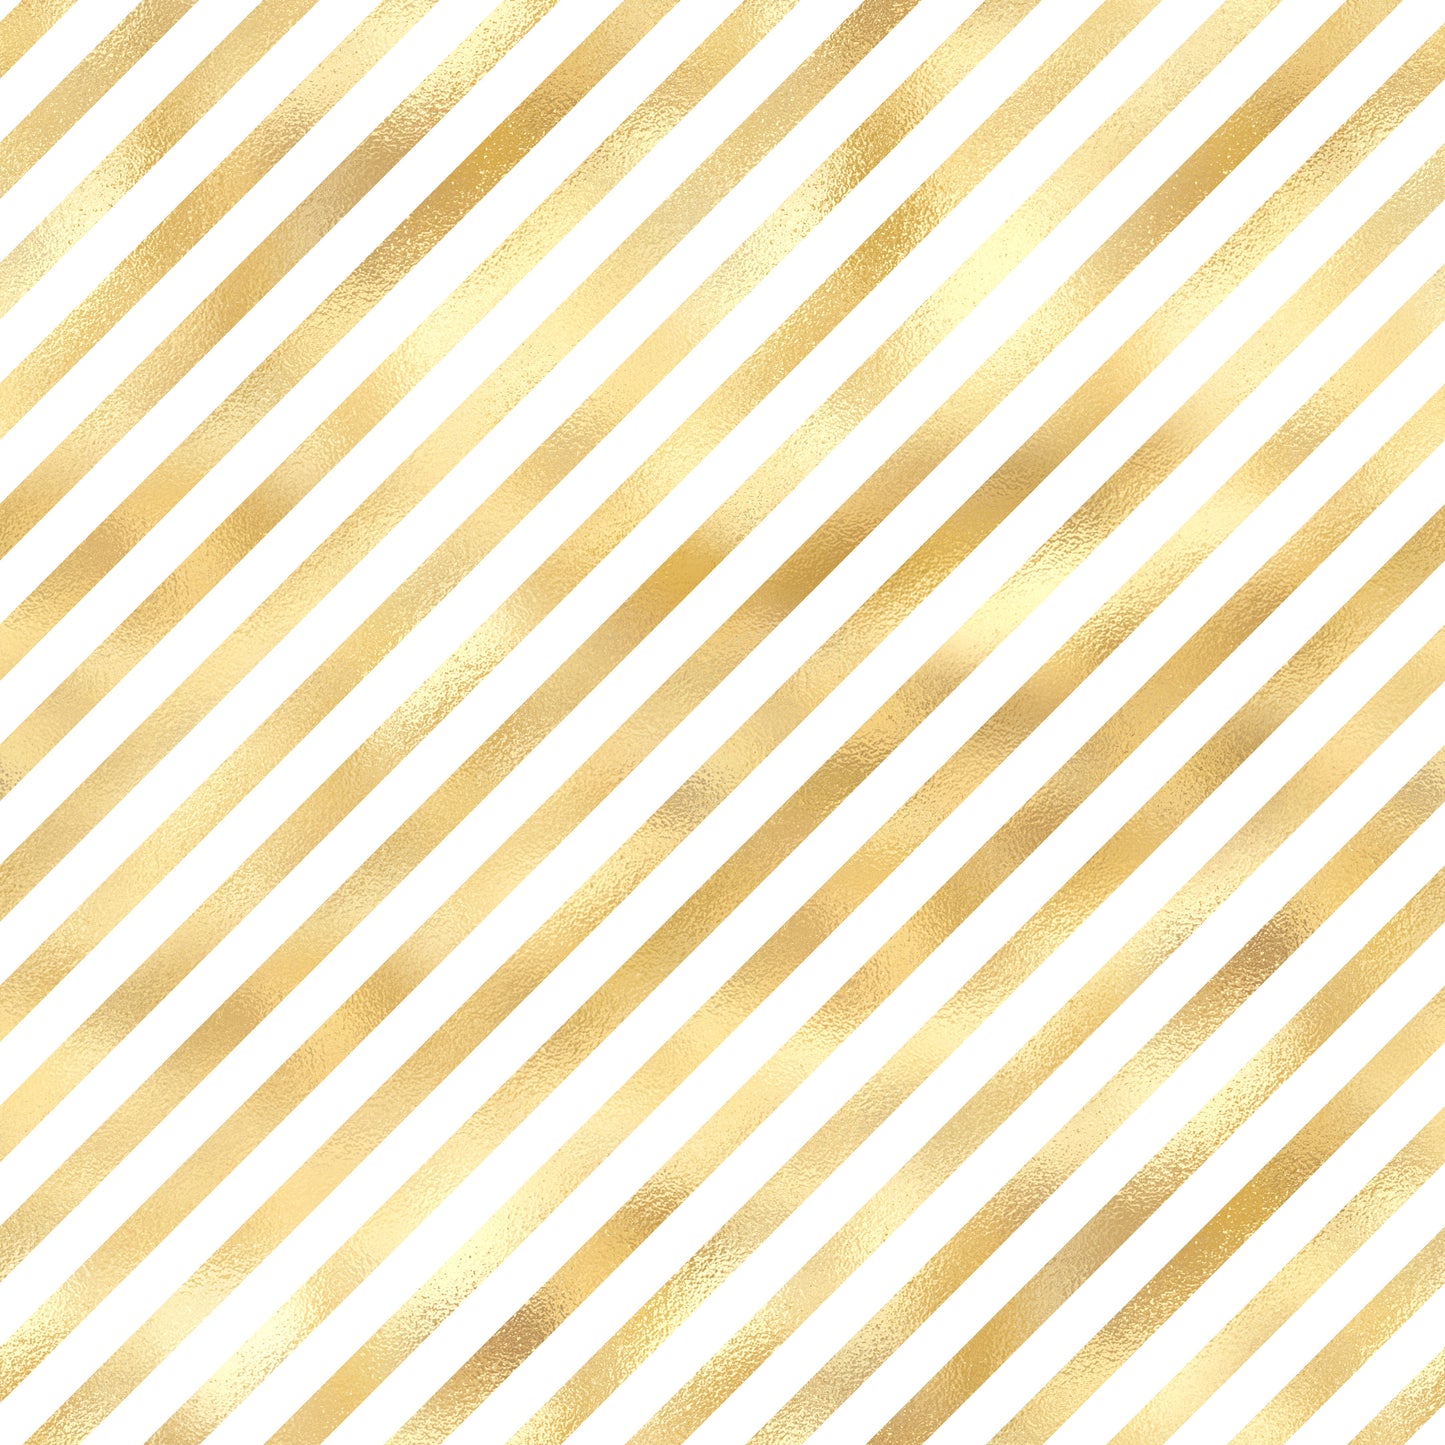 White with gold strips - 020 Vinyl Sheet